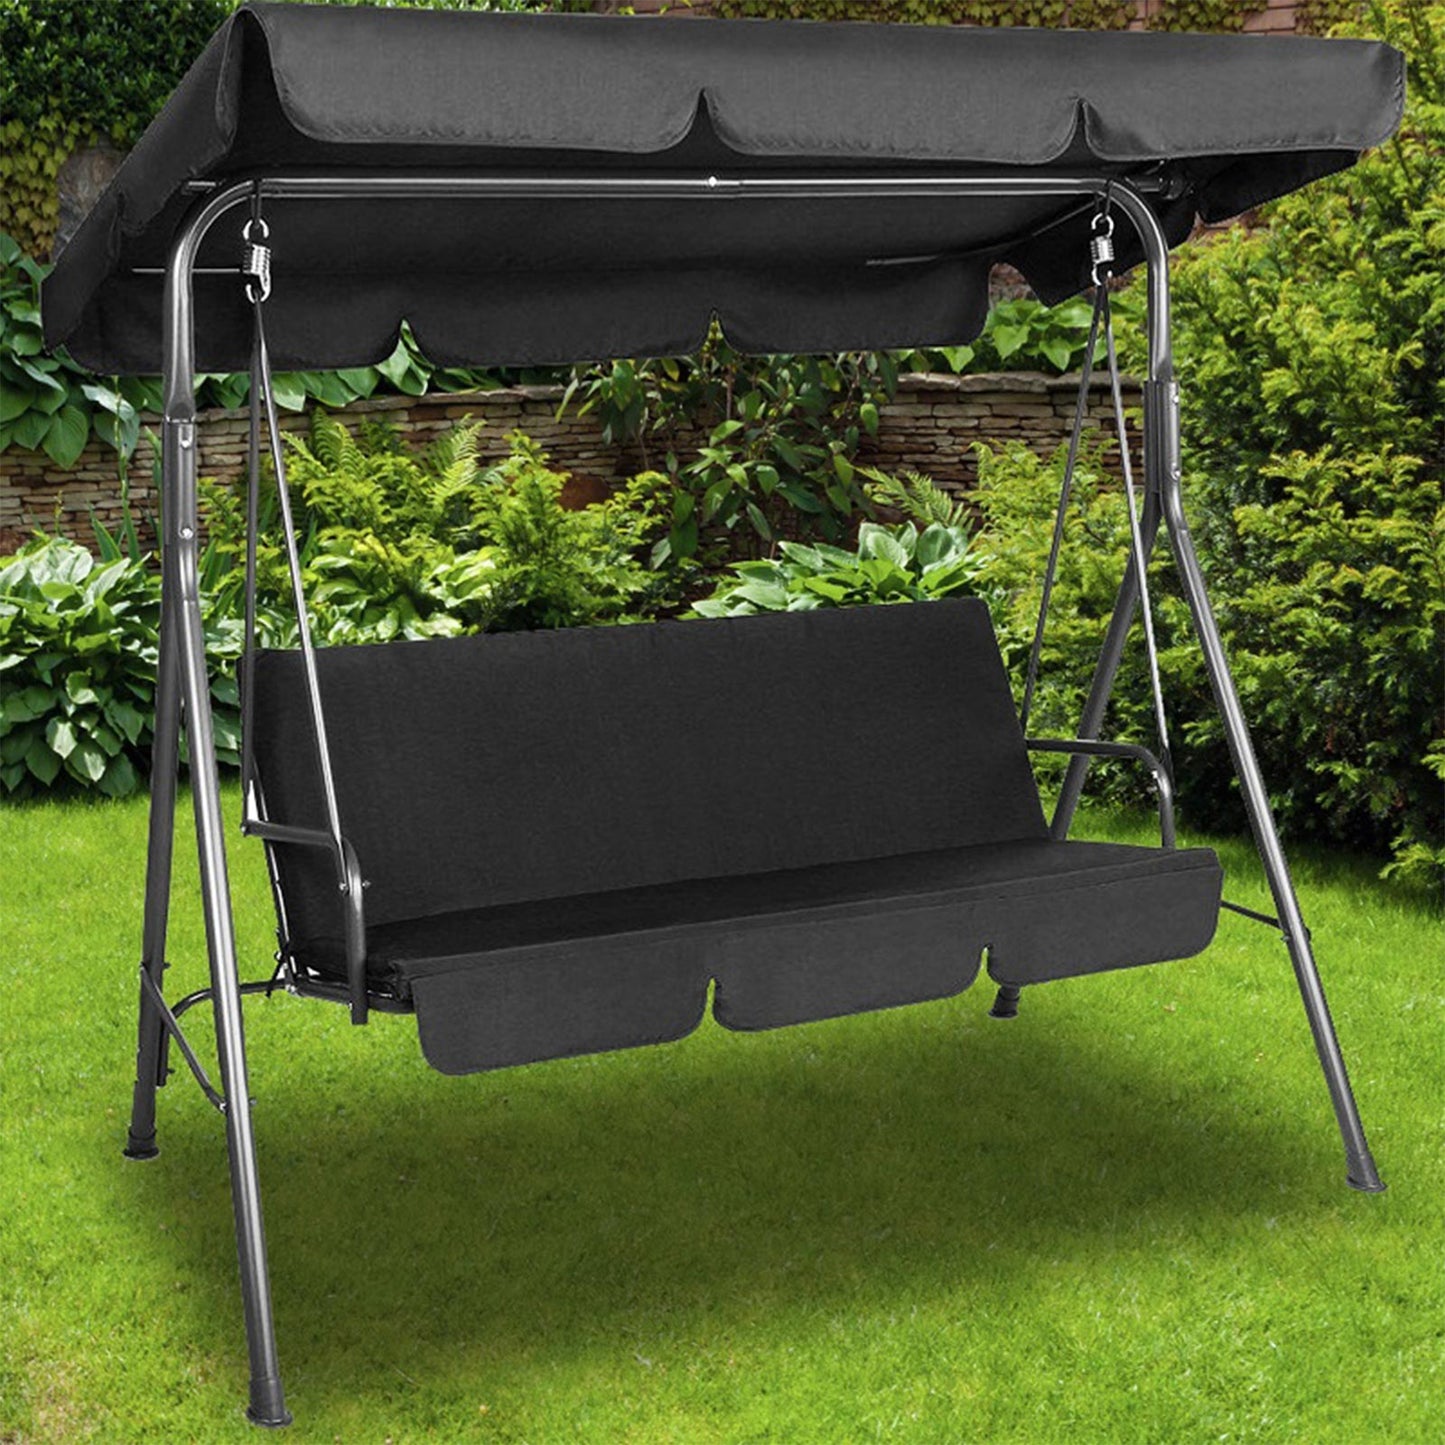 Milano Outdoor Swing Bench Seat Chair Canopy Furniture 3 Seater Garden Hammock - Black - image3